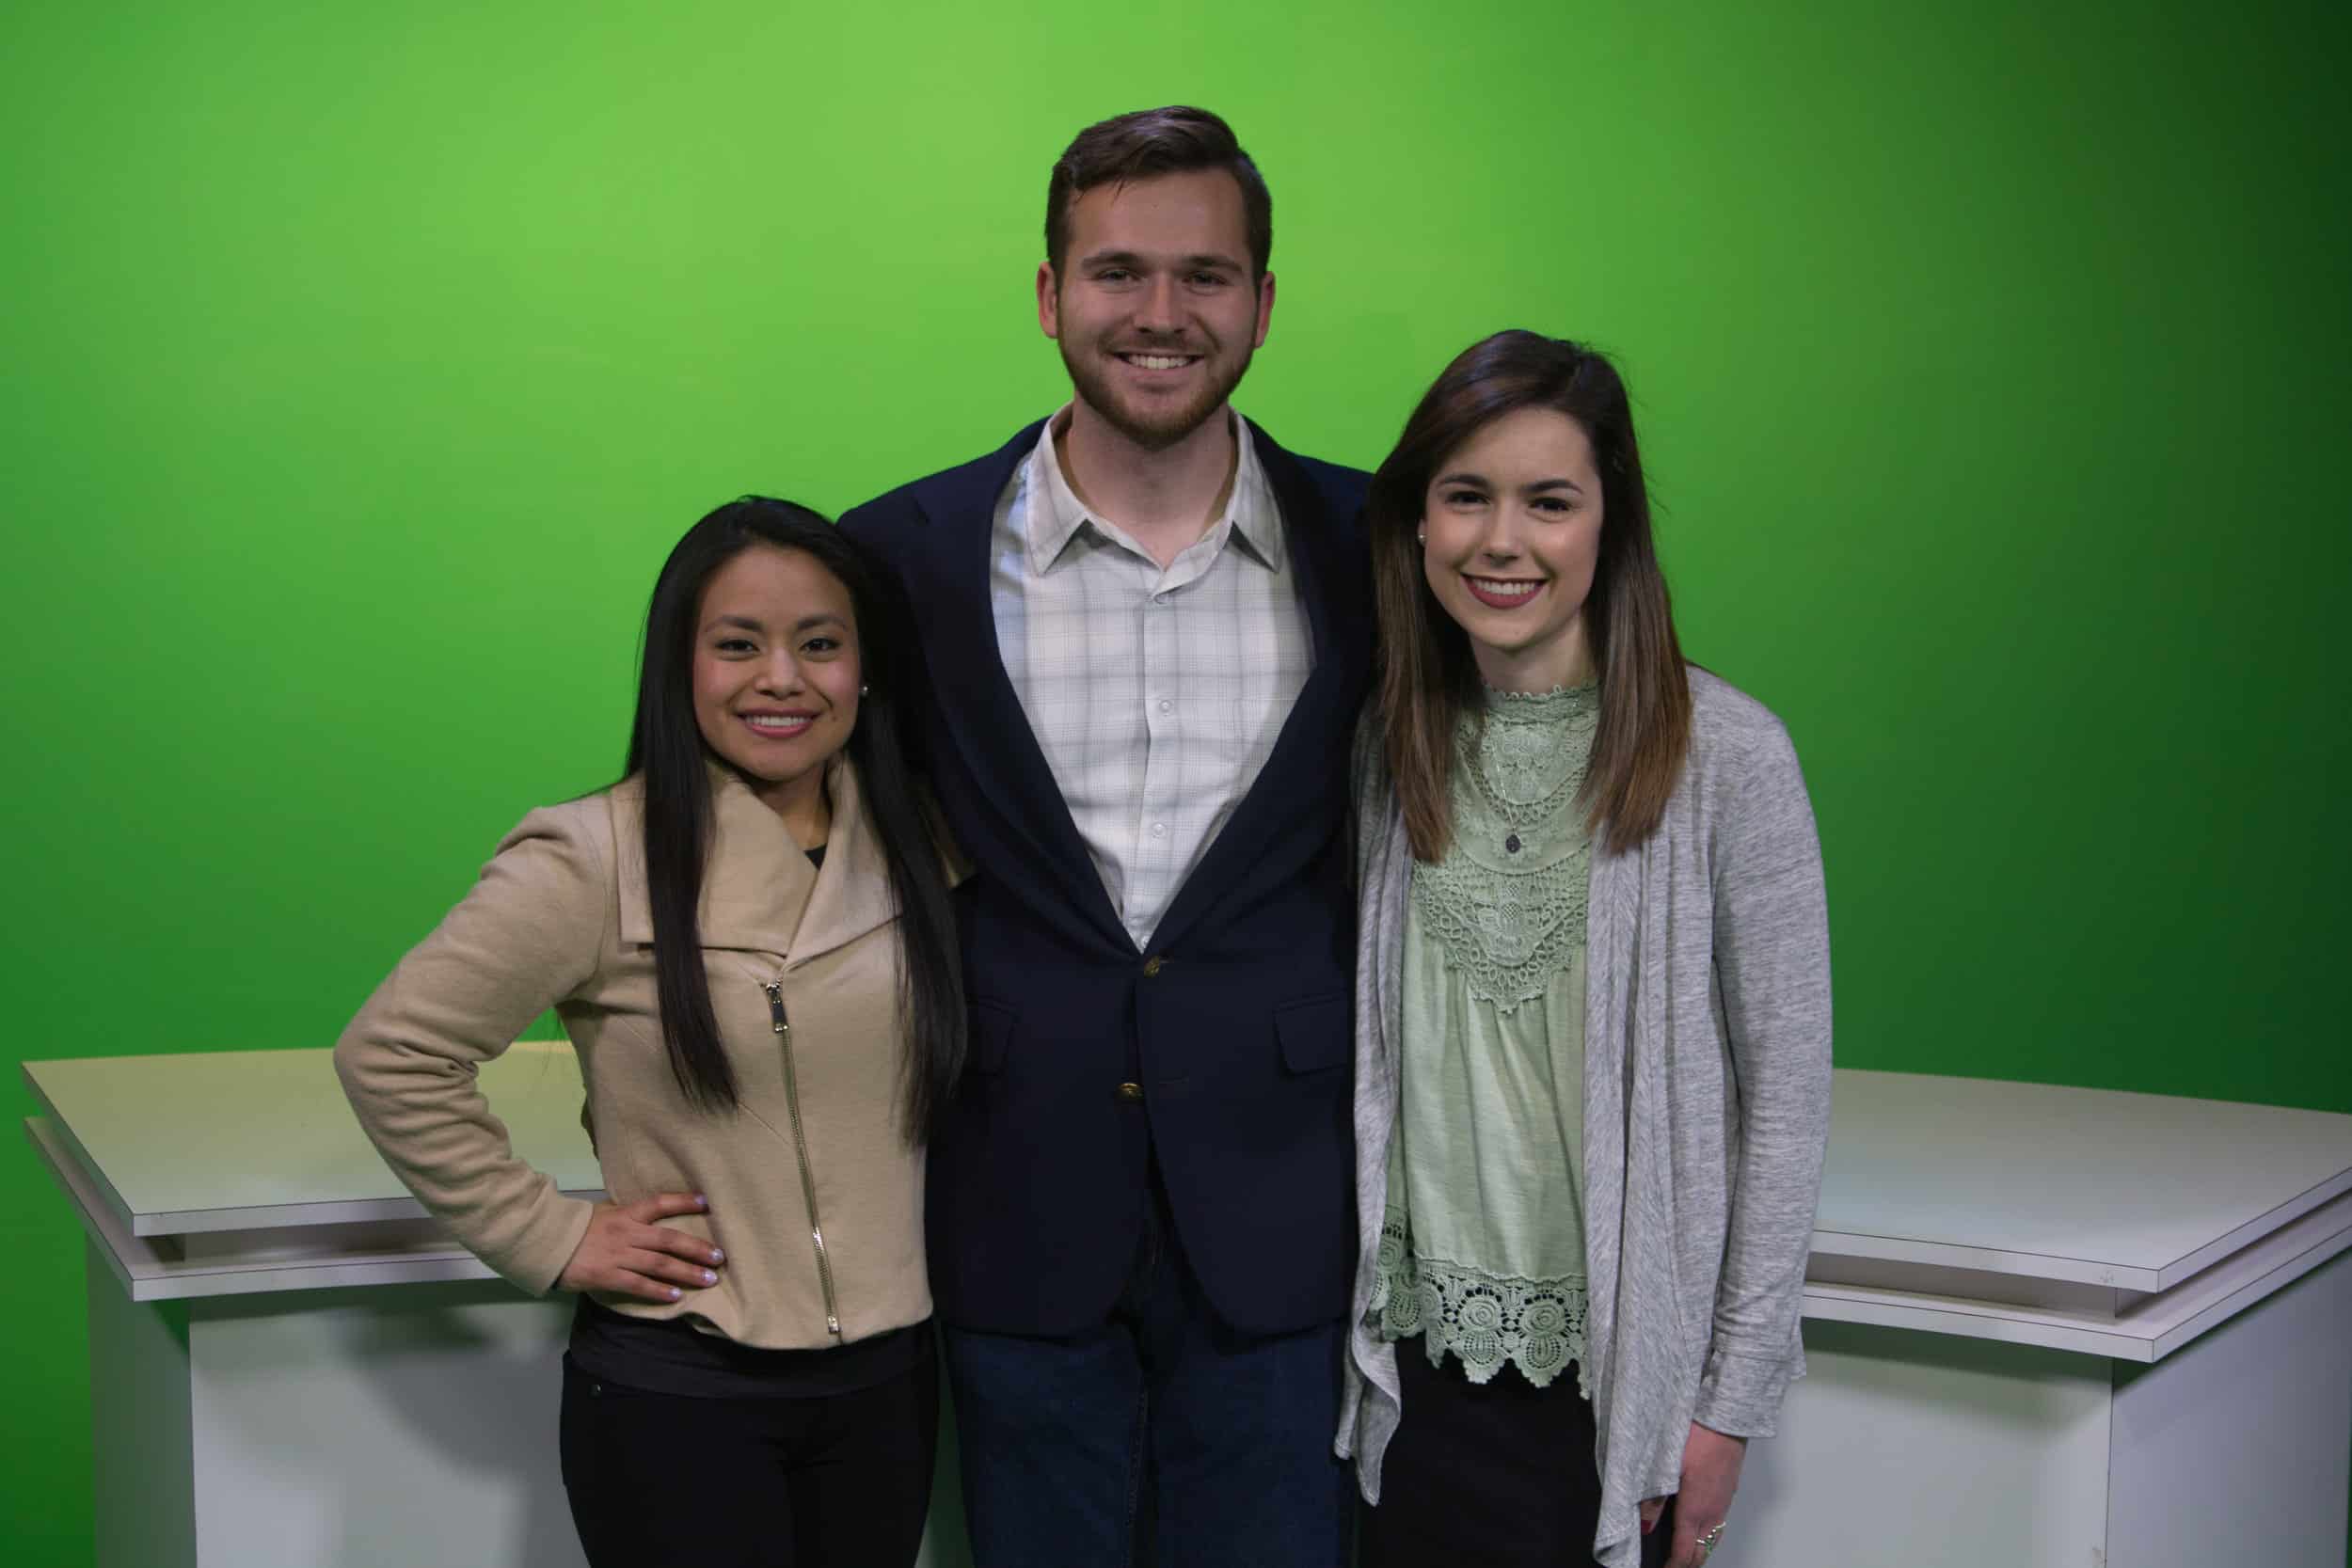 Vision 48 staffers Josefa Ventura, Quentin Gosselin and Alyssa Ashe helped produce award-winning coverage for the student television station.Photo Courtesy of Jake Hardin